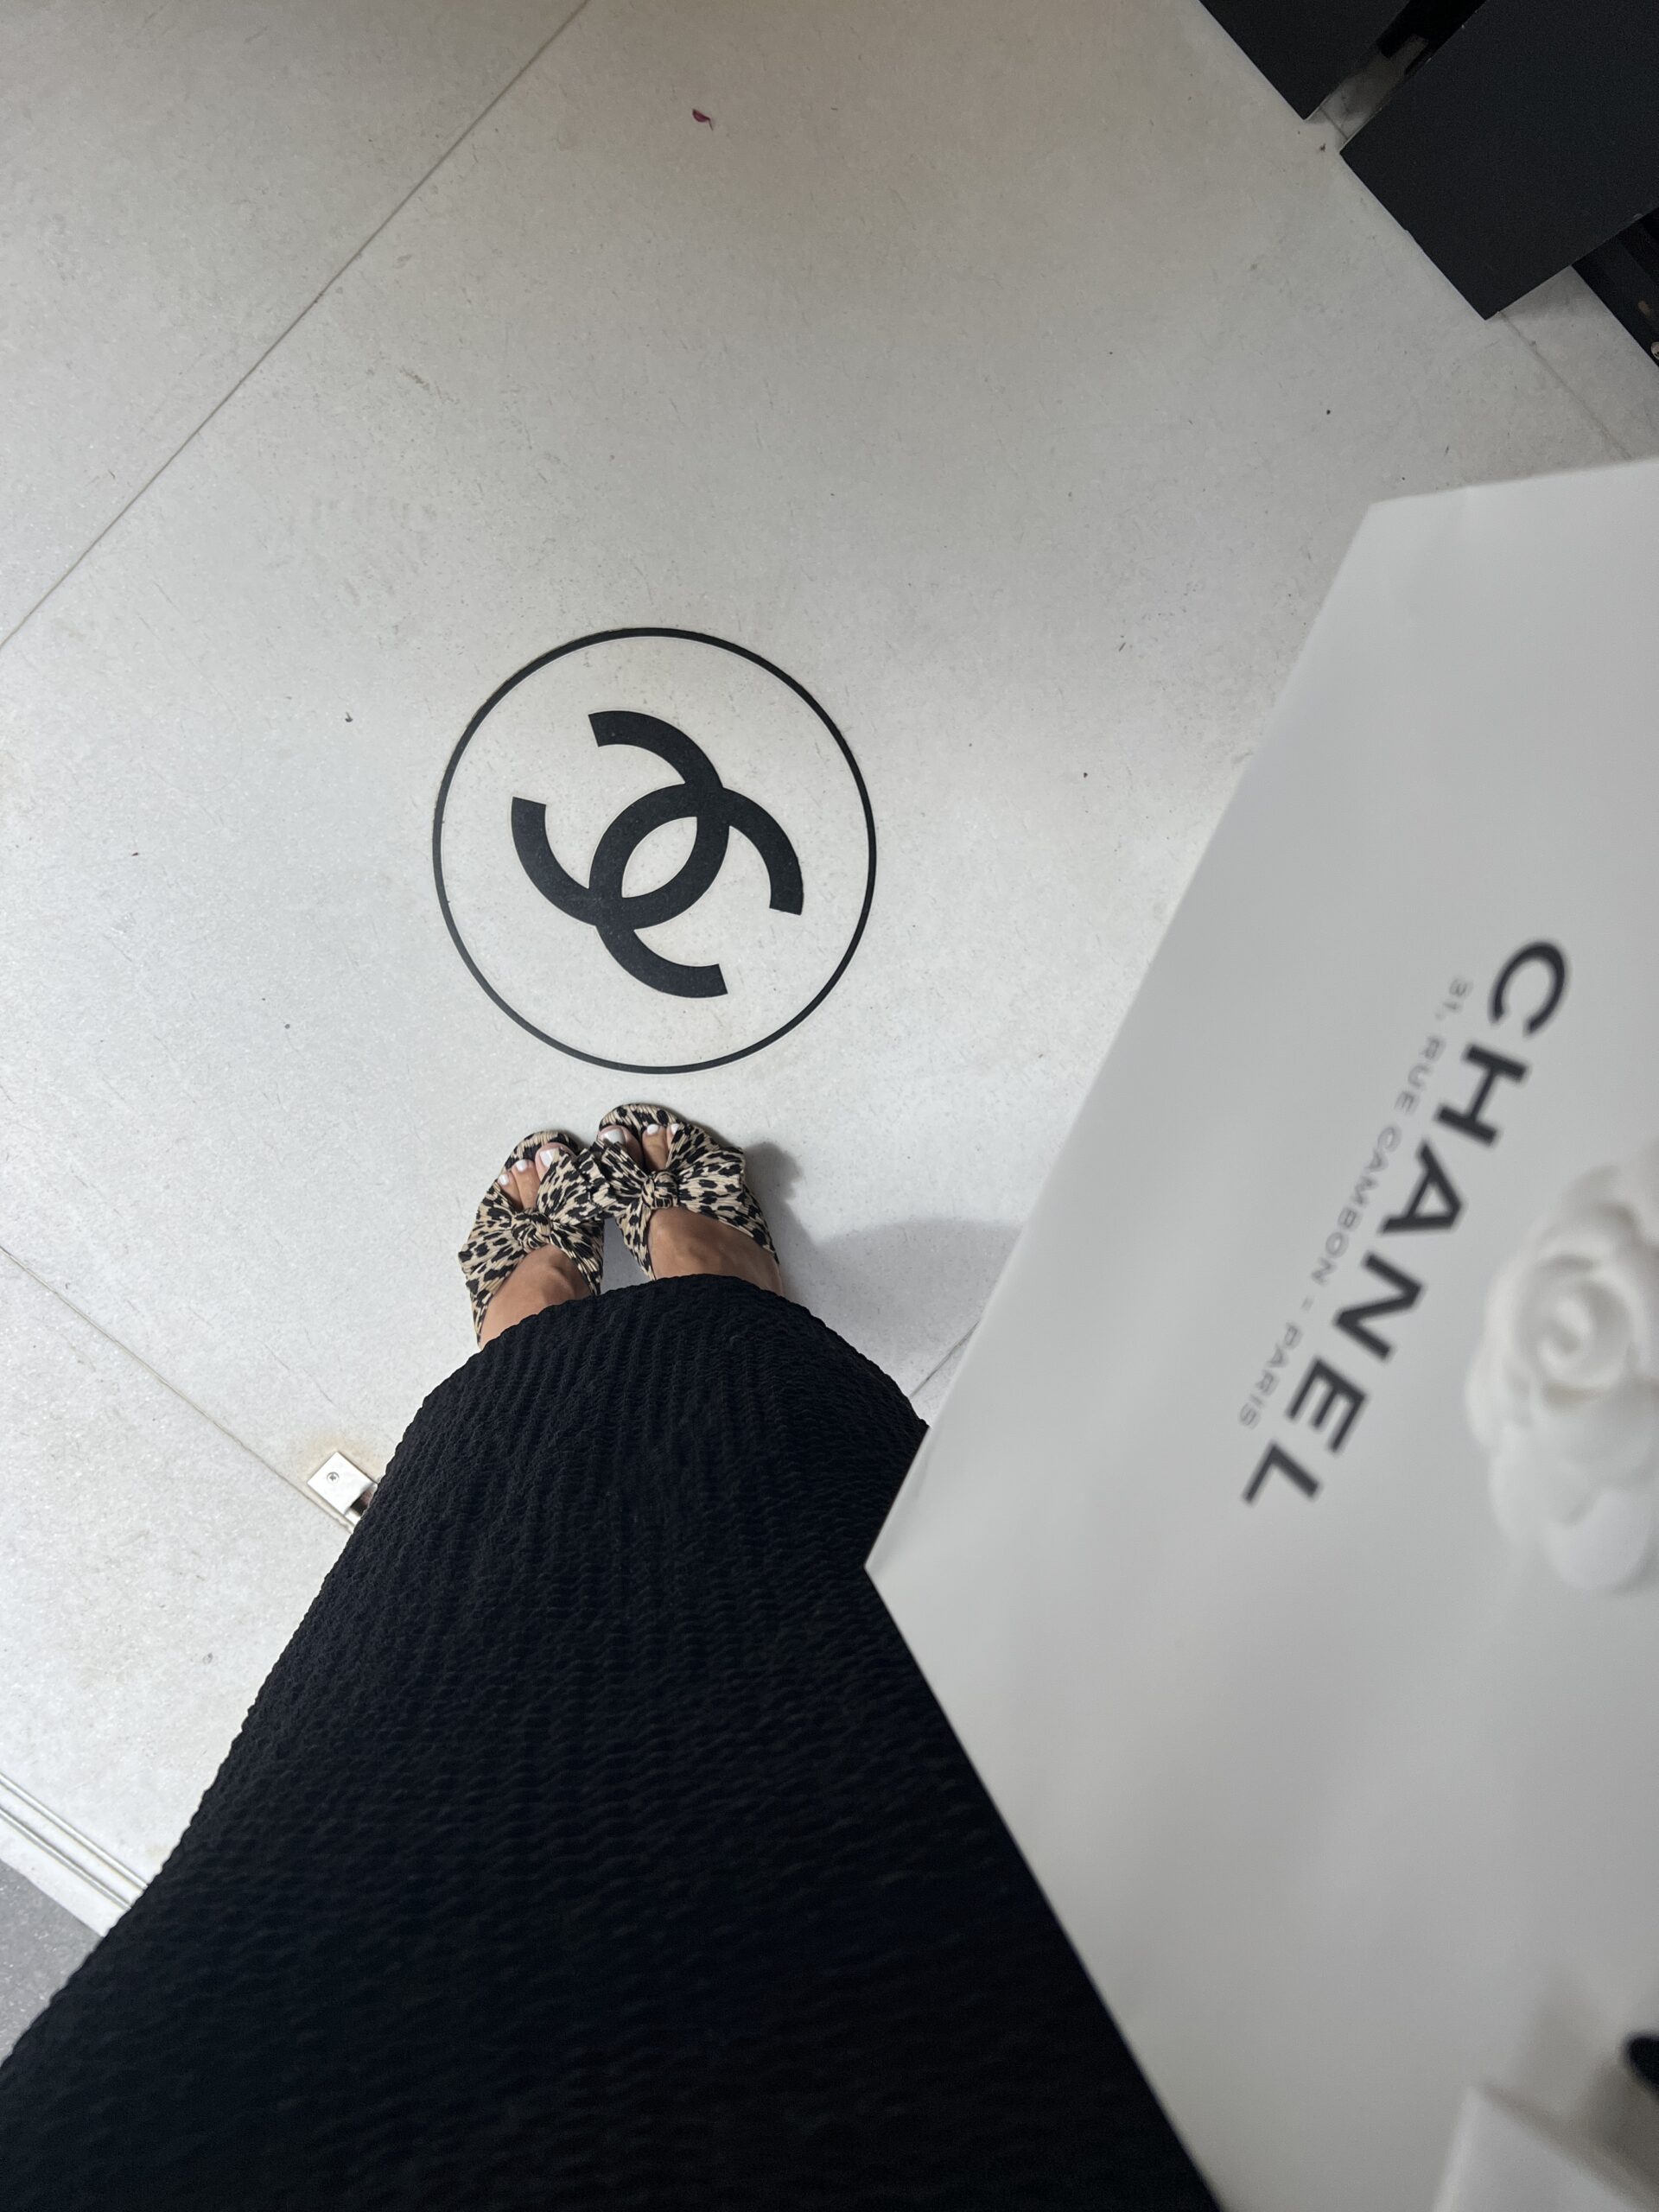 chanel store shopping bags